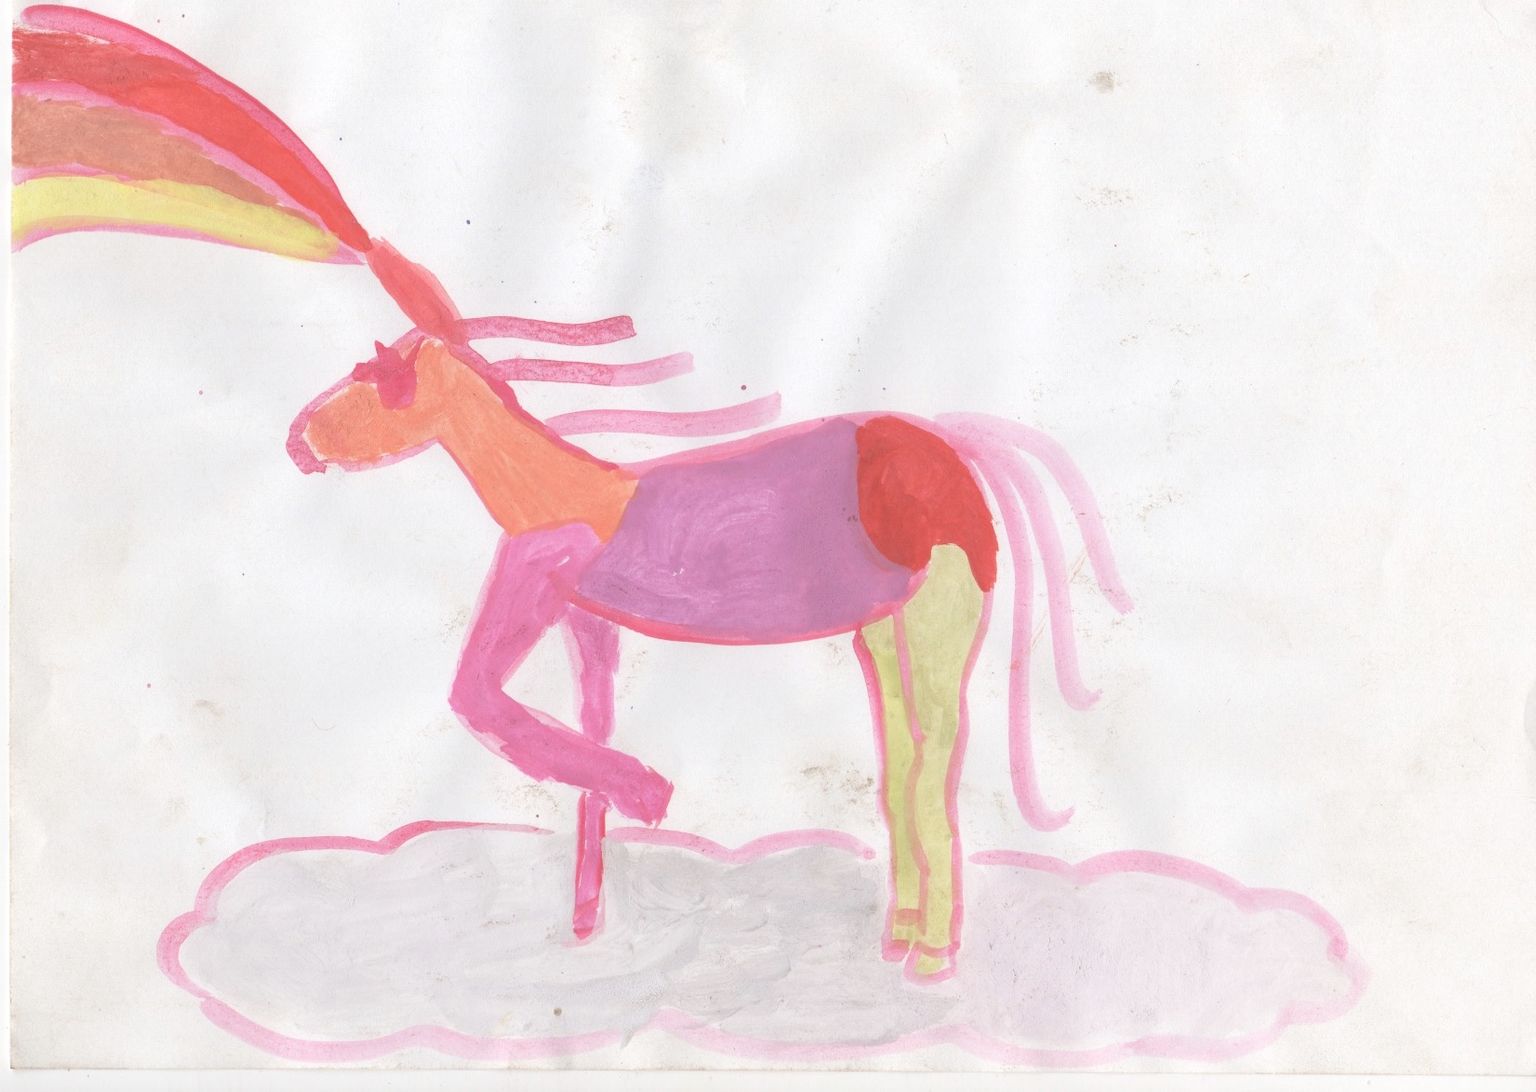 watercolor drawing of a unicorn filled in with yellow, red, pink and orange. a rainbow is coming out of the unicorn's horn, and the unicorn is standing on a cloud.